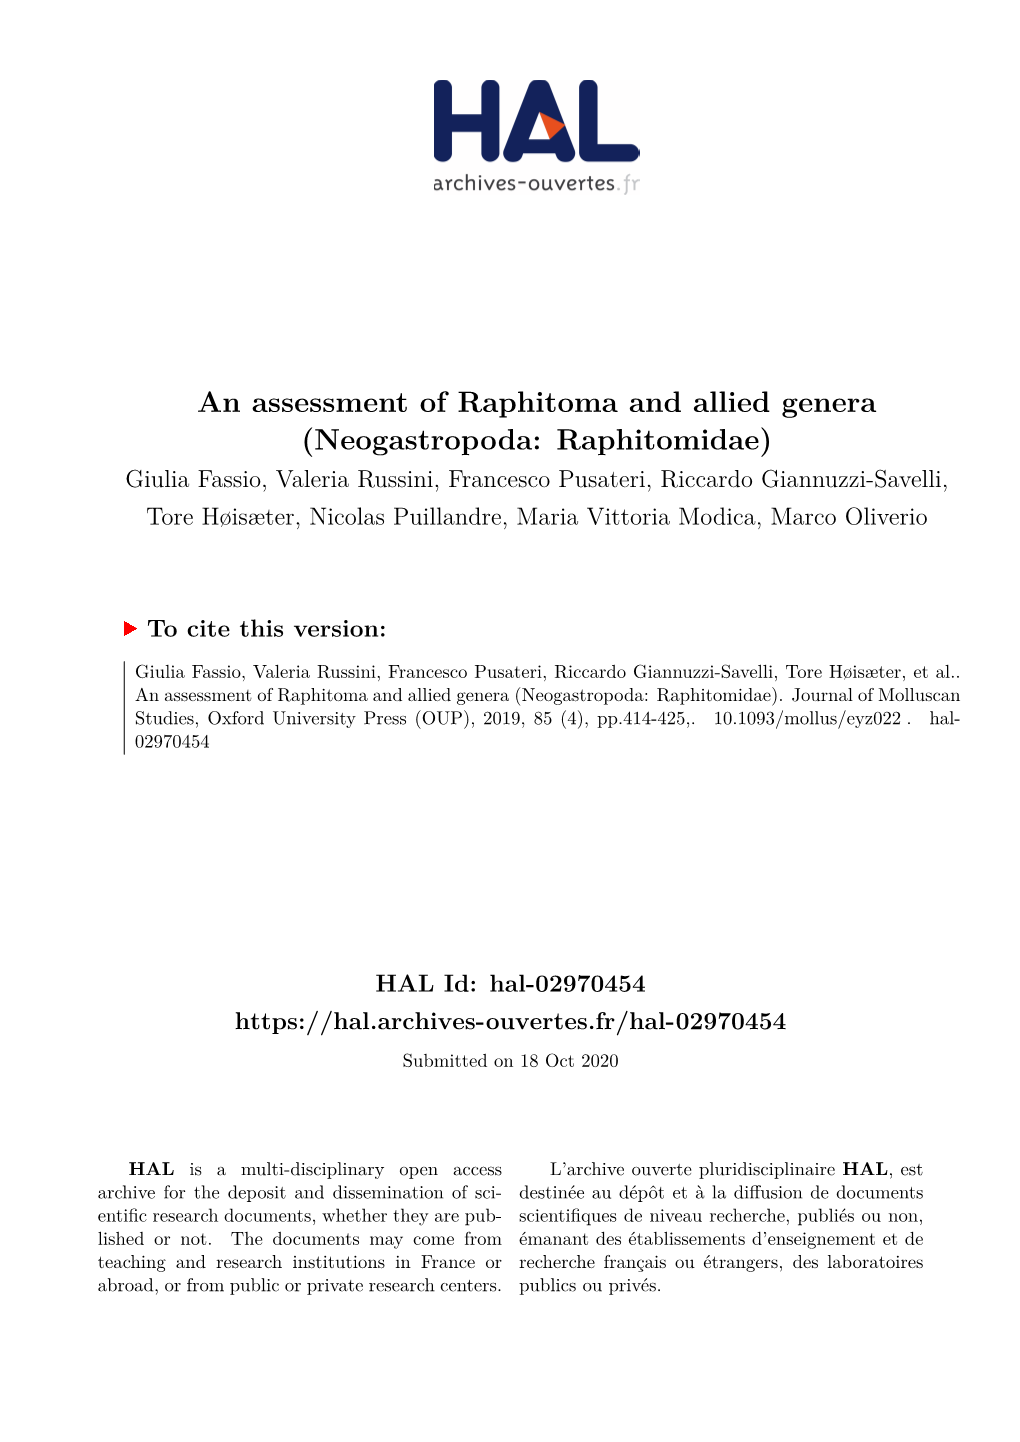 An Assessment of Raphitoma and Allied Genera (Neogastropoda: Raphitomidae)